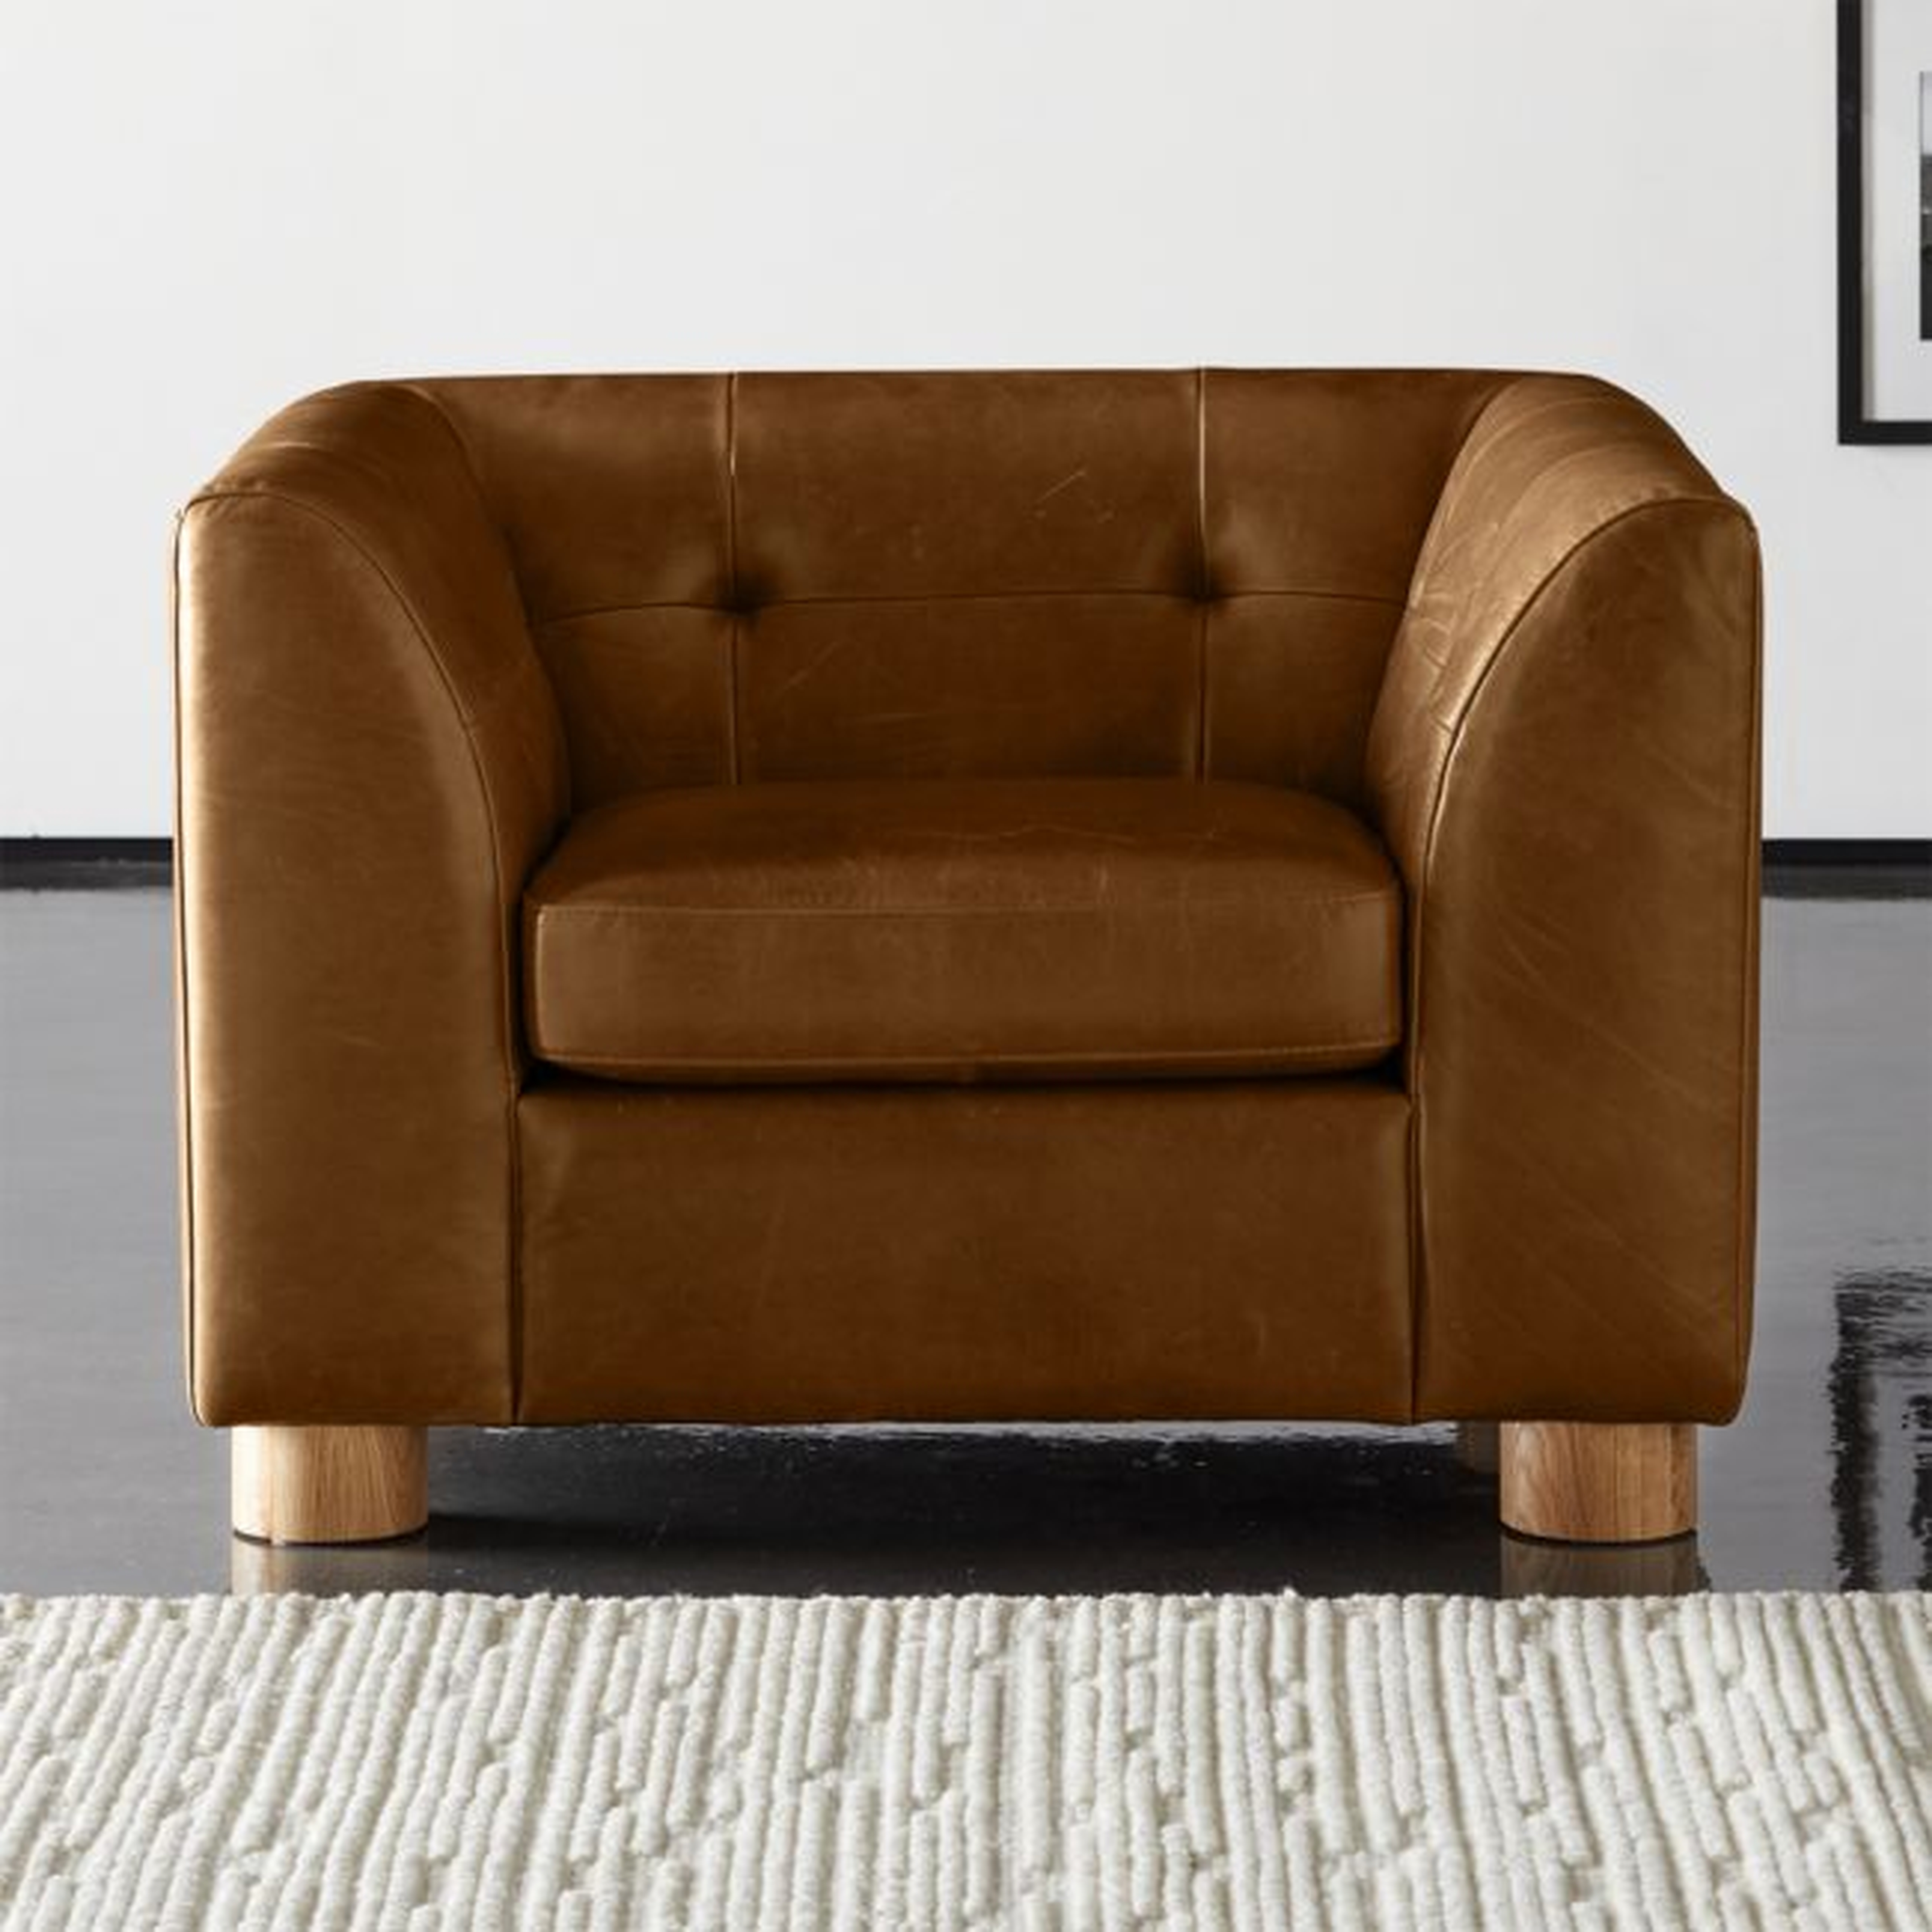 Kotka Tobacco Tufted Leather Chair - CB2